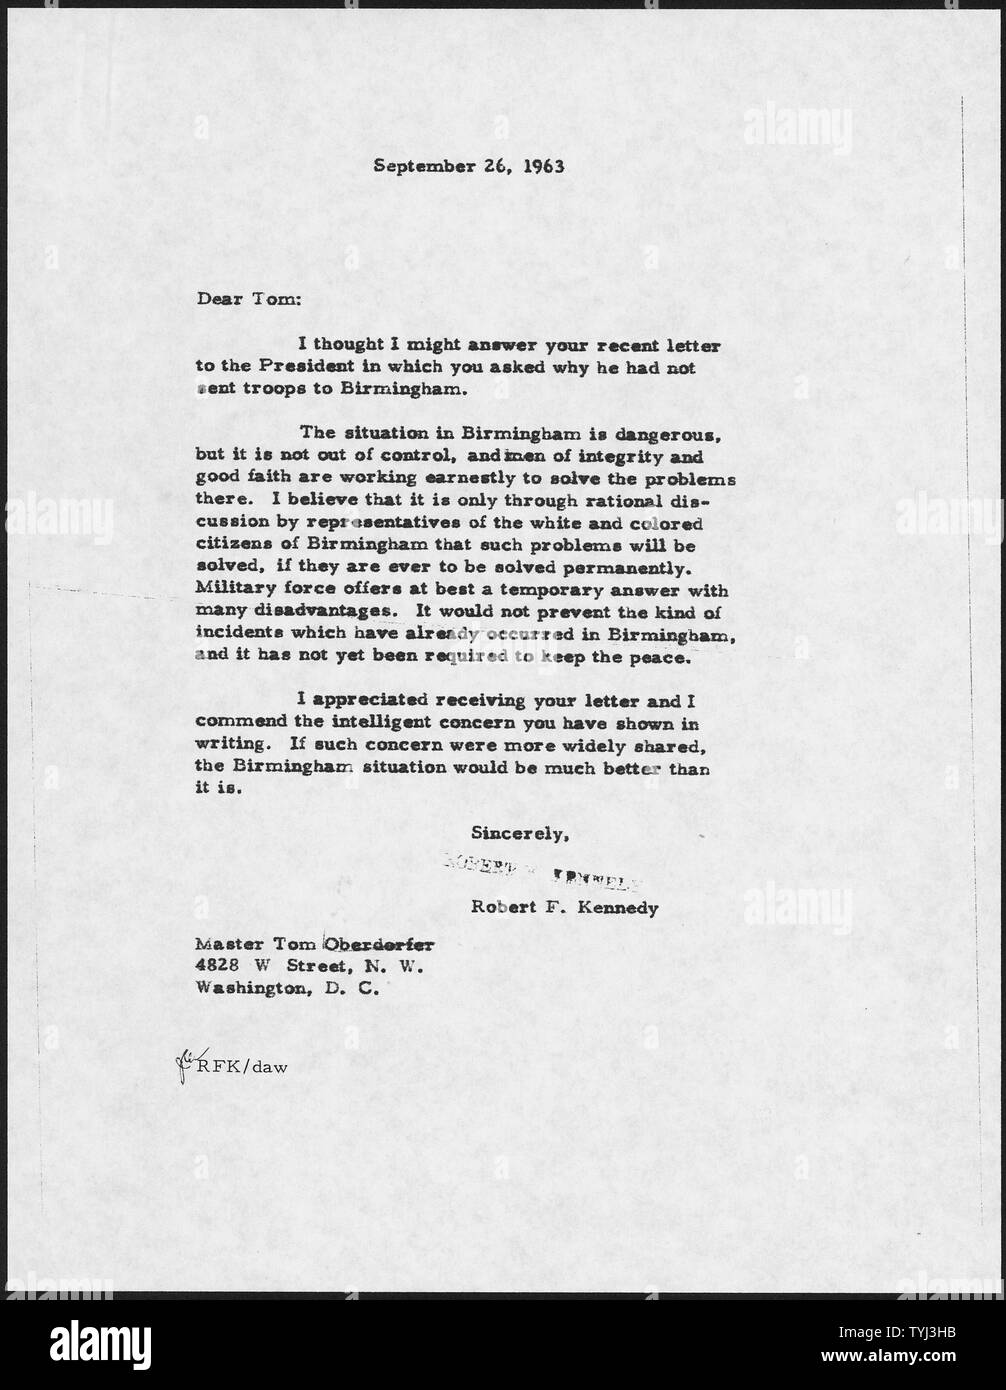 Robert F. Kennedy Letter Birmingham, Alabama September 26, 1963; Scope and content:  Robert F. Kennedy's response to child's letter on stituation in Birmingham, Alabama. General notes:  Kennedy,John F. Stock Photo